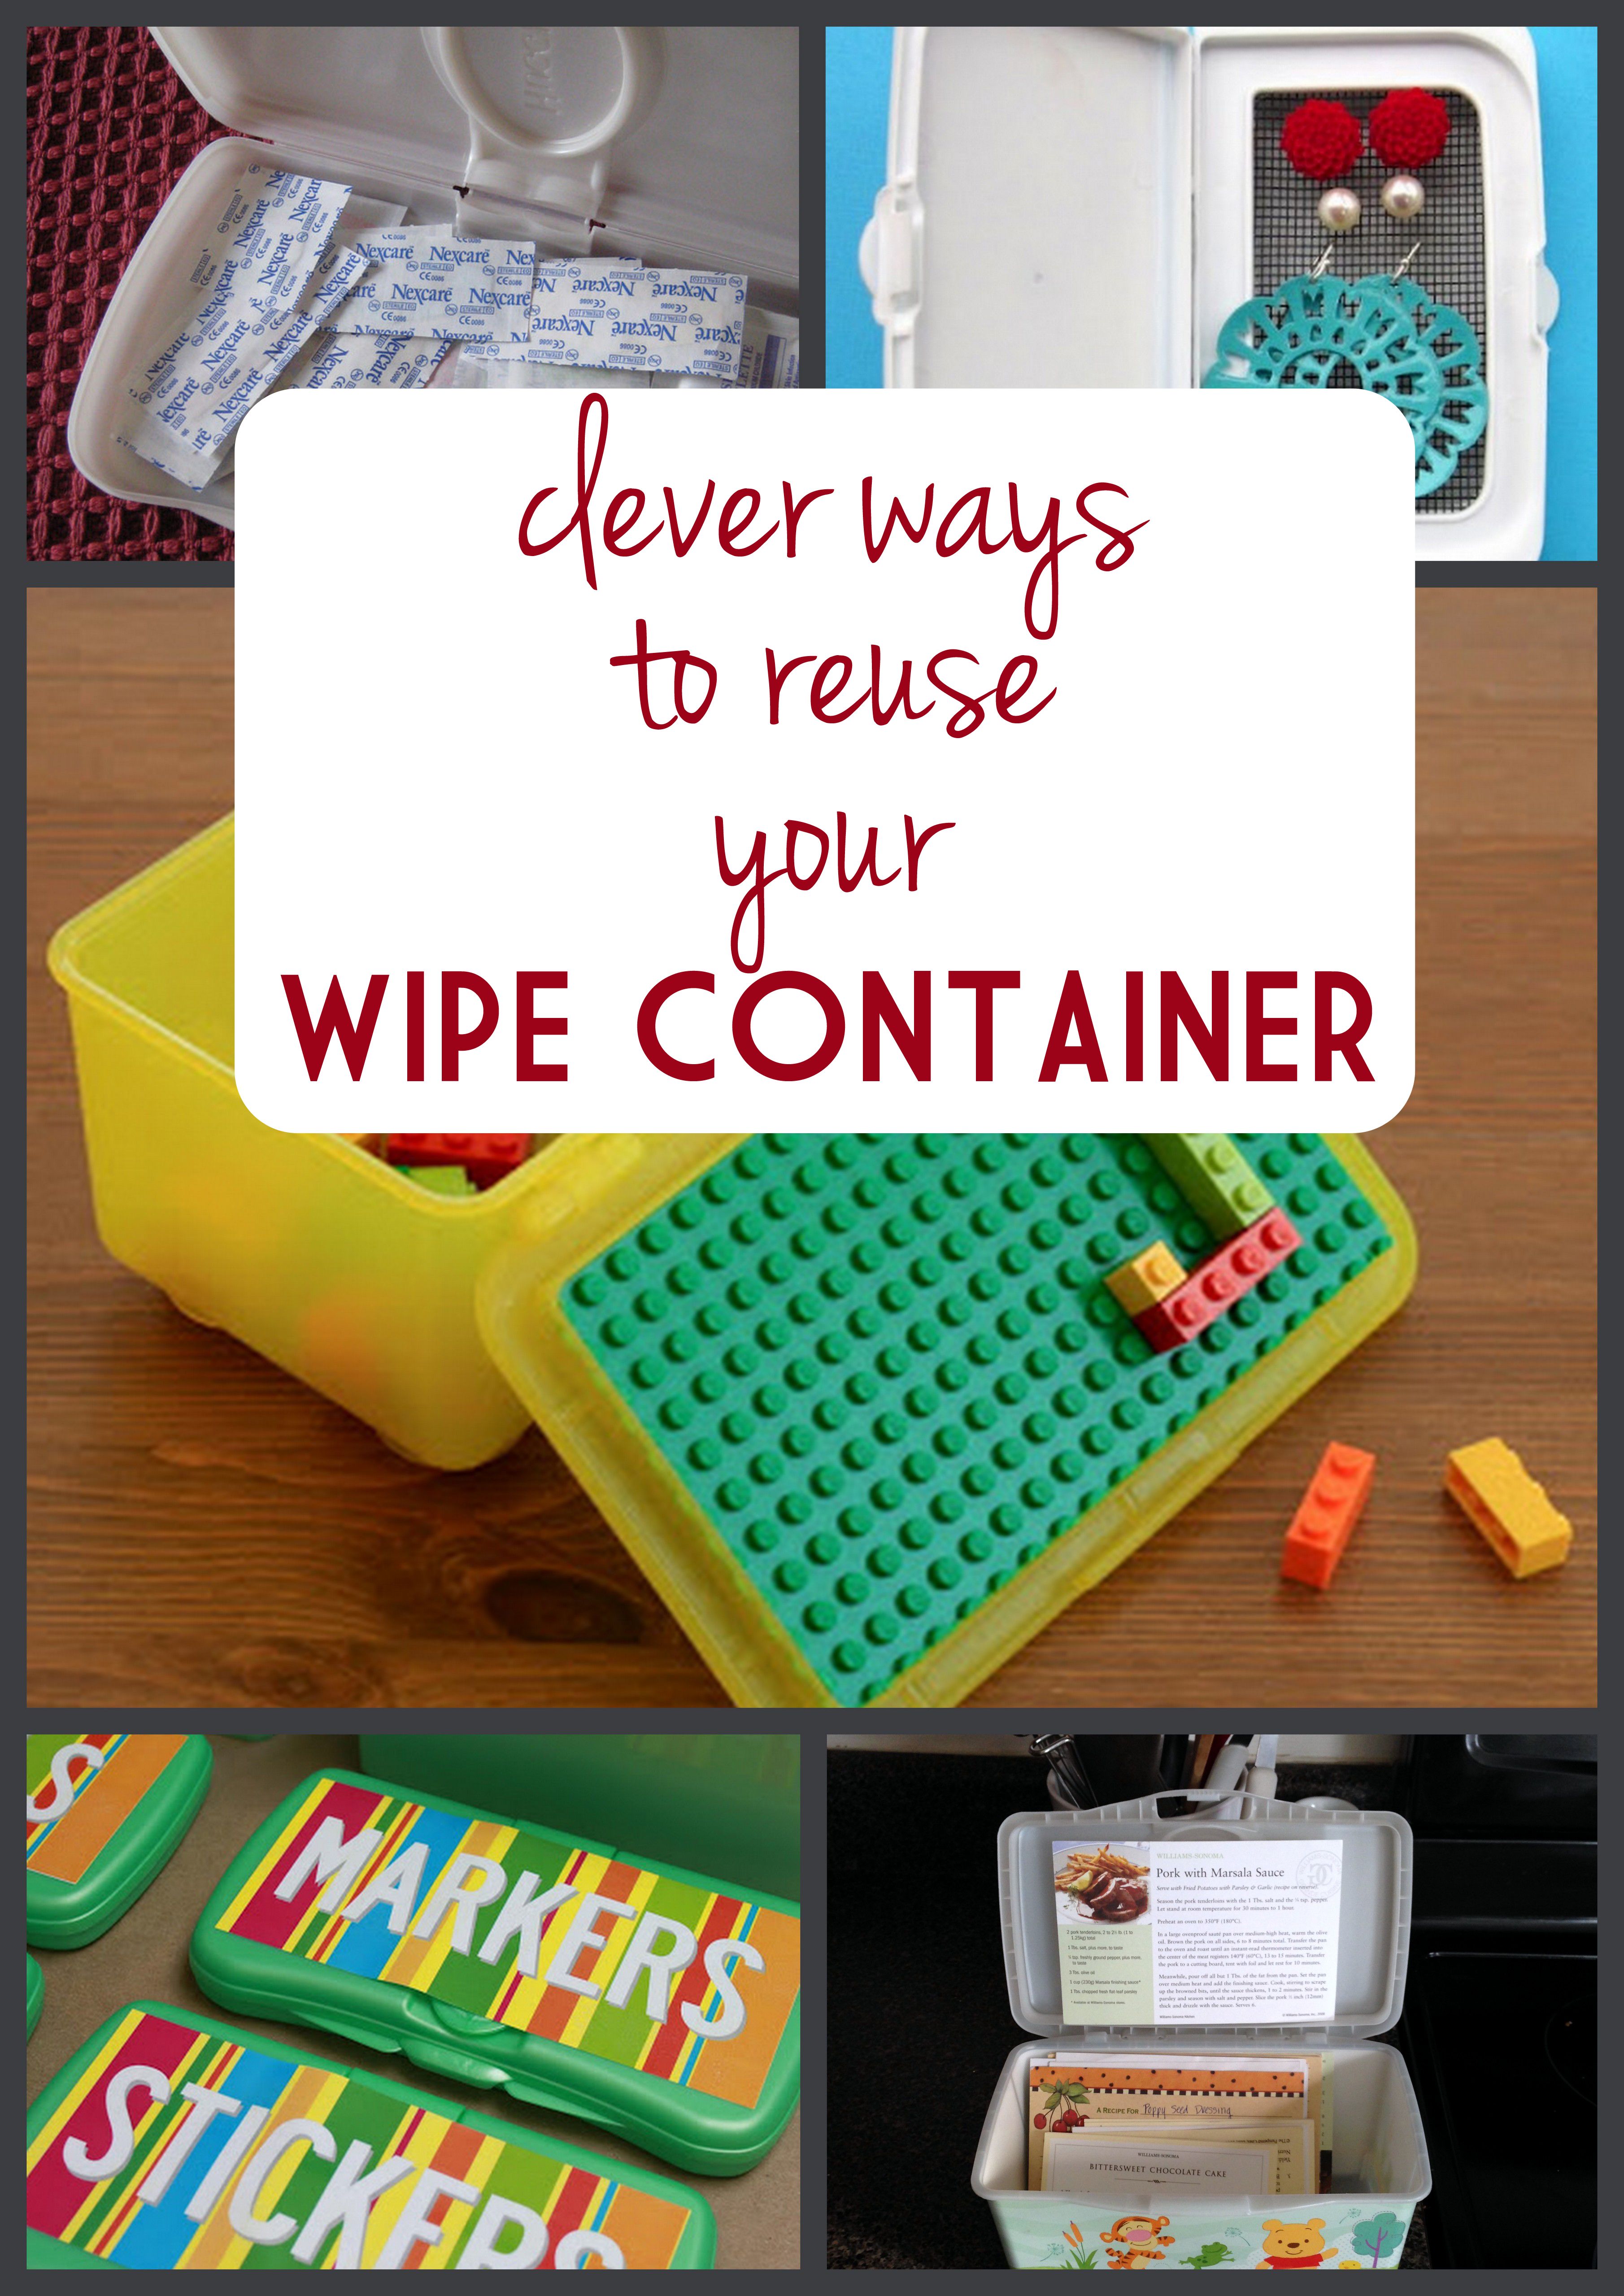 8 Fun Ways to Reuse a Wipe Container | Wipes container, Empty and Clever